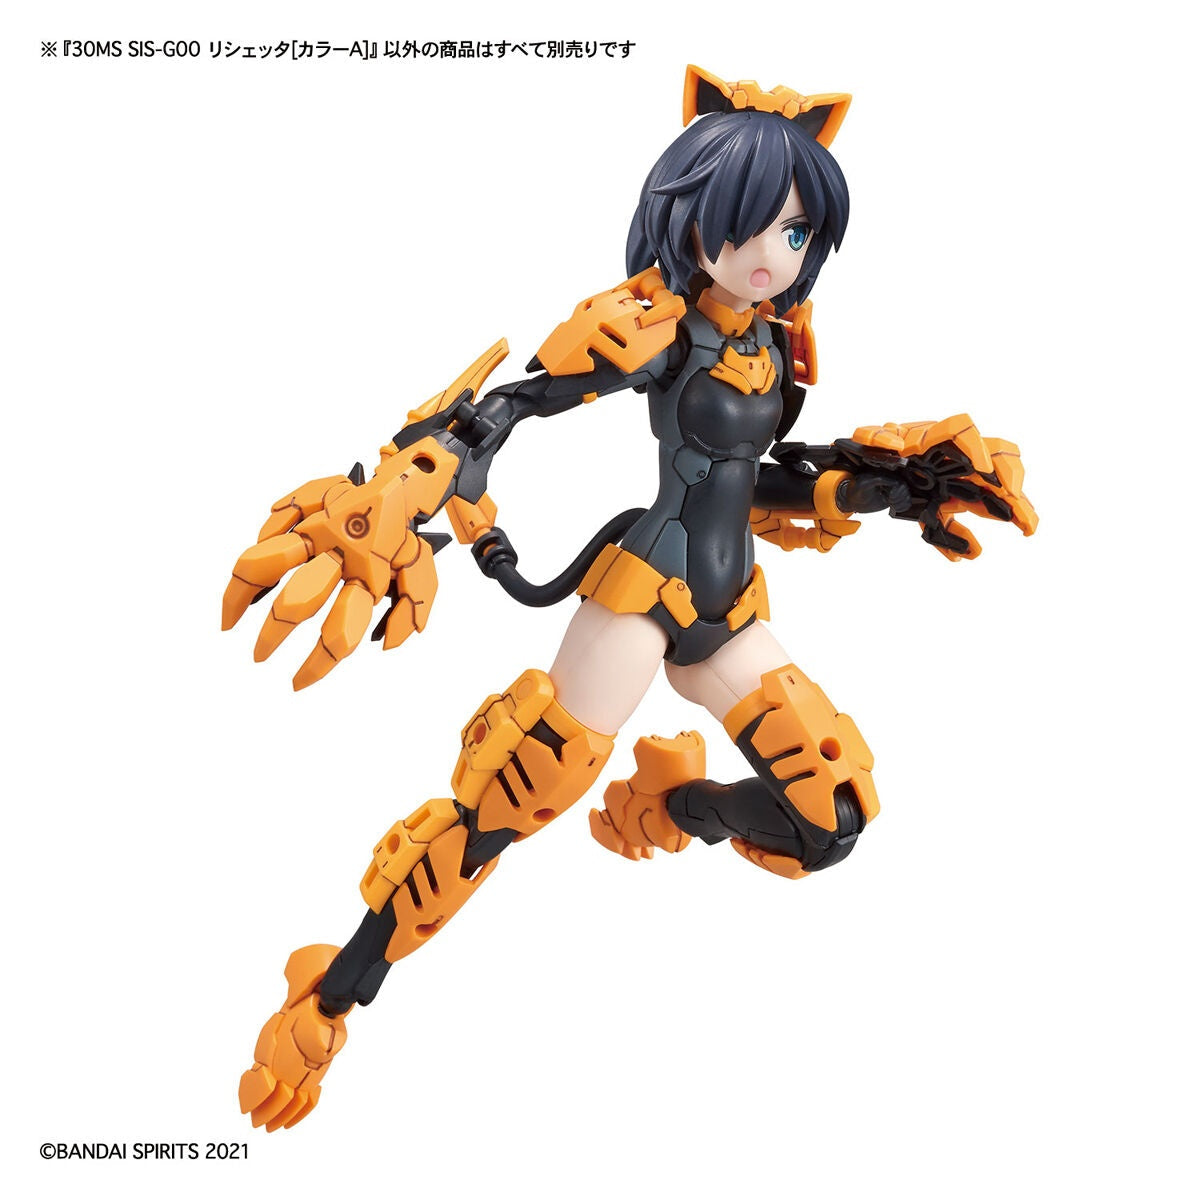 30MS SIS-G00 Rishetta [Color A]-Bandai-Ace Cards &amp; Collectibles